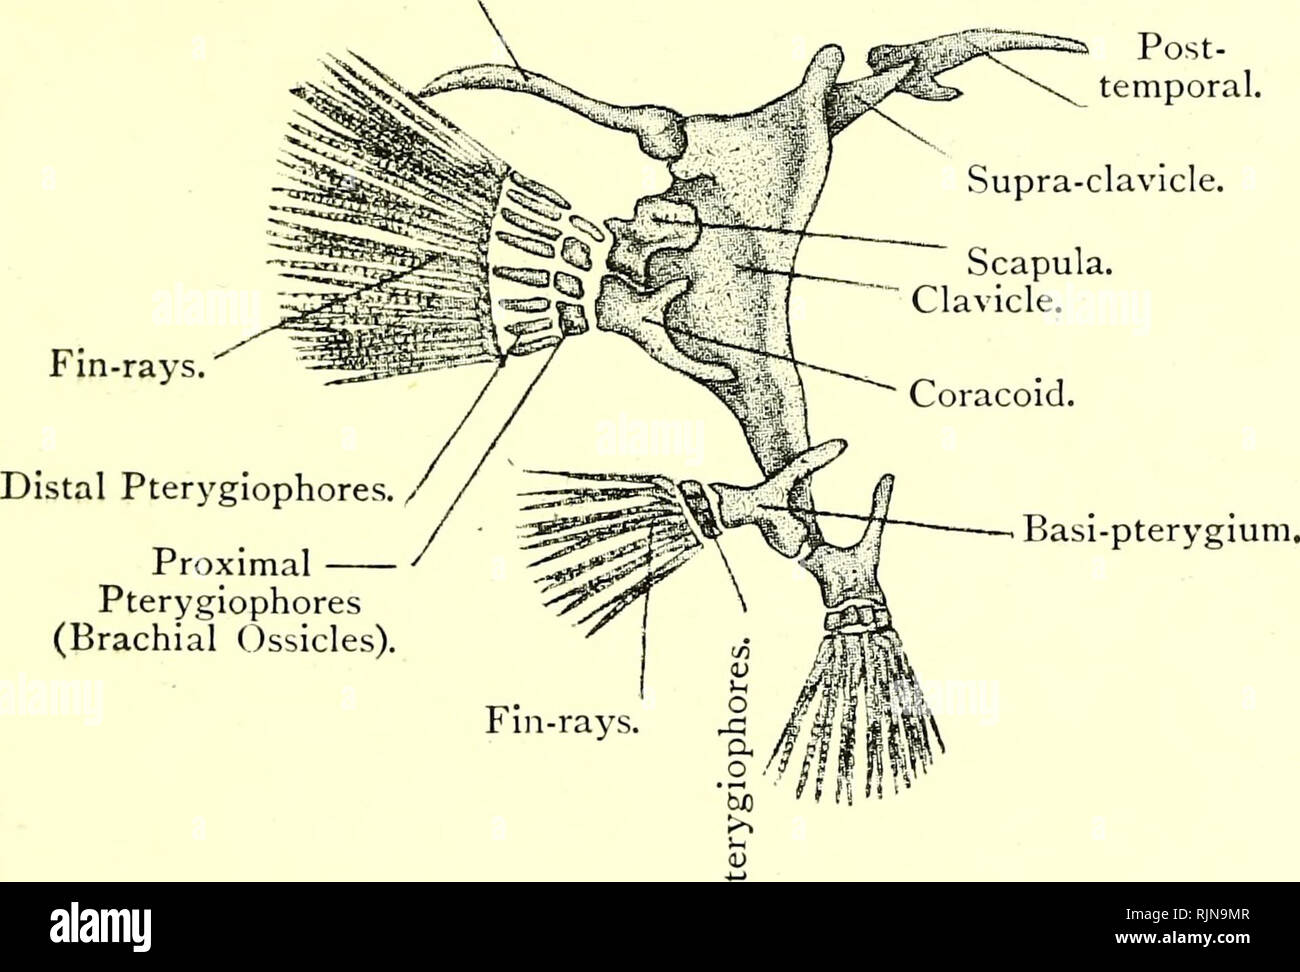 . Elementary text-book of zoology [electronic resource]. Zoology. GAD us. 337 and the cerato-branchials of the fifth arch form the inferior pharyngeal bones. The vertebral colunni consists of a large number of aniphi-ccelotis verteh-a. The anterior are termed abdominal and the posterior are caudal. All the vertebrae have complete neural arches and neural spines. Most of the abdominal have also transverse processes, which bear a pair of ribs and a pair of more dorsally placed so-called inter- muscular bones. In the caudal vertebrae the transverse processes meet below and form a complete hcetnal Stock Photo